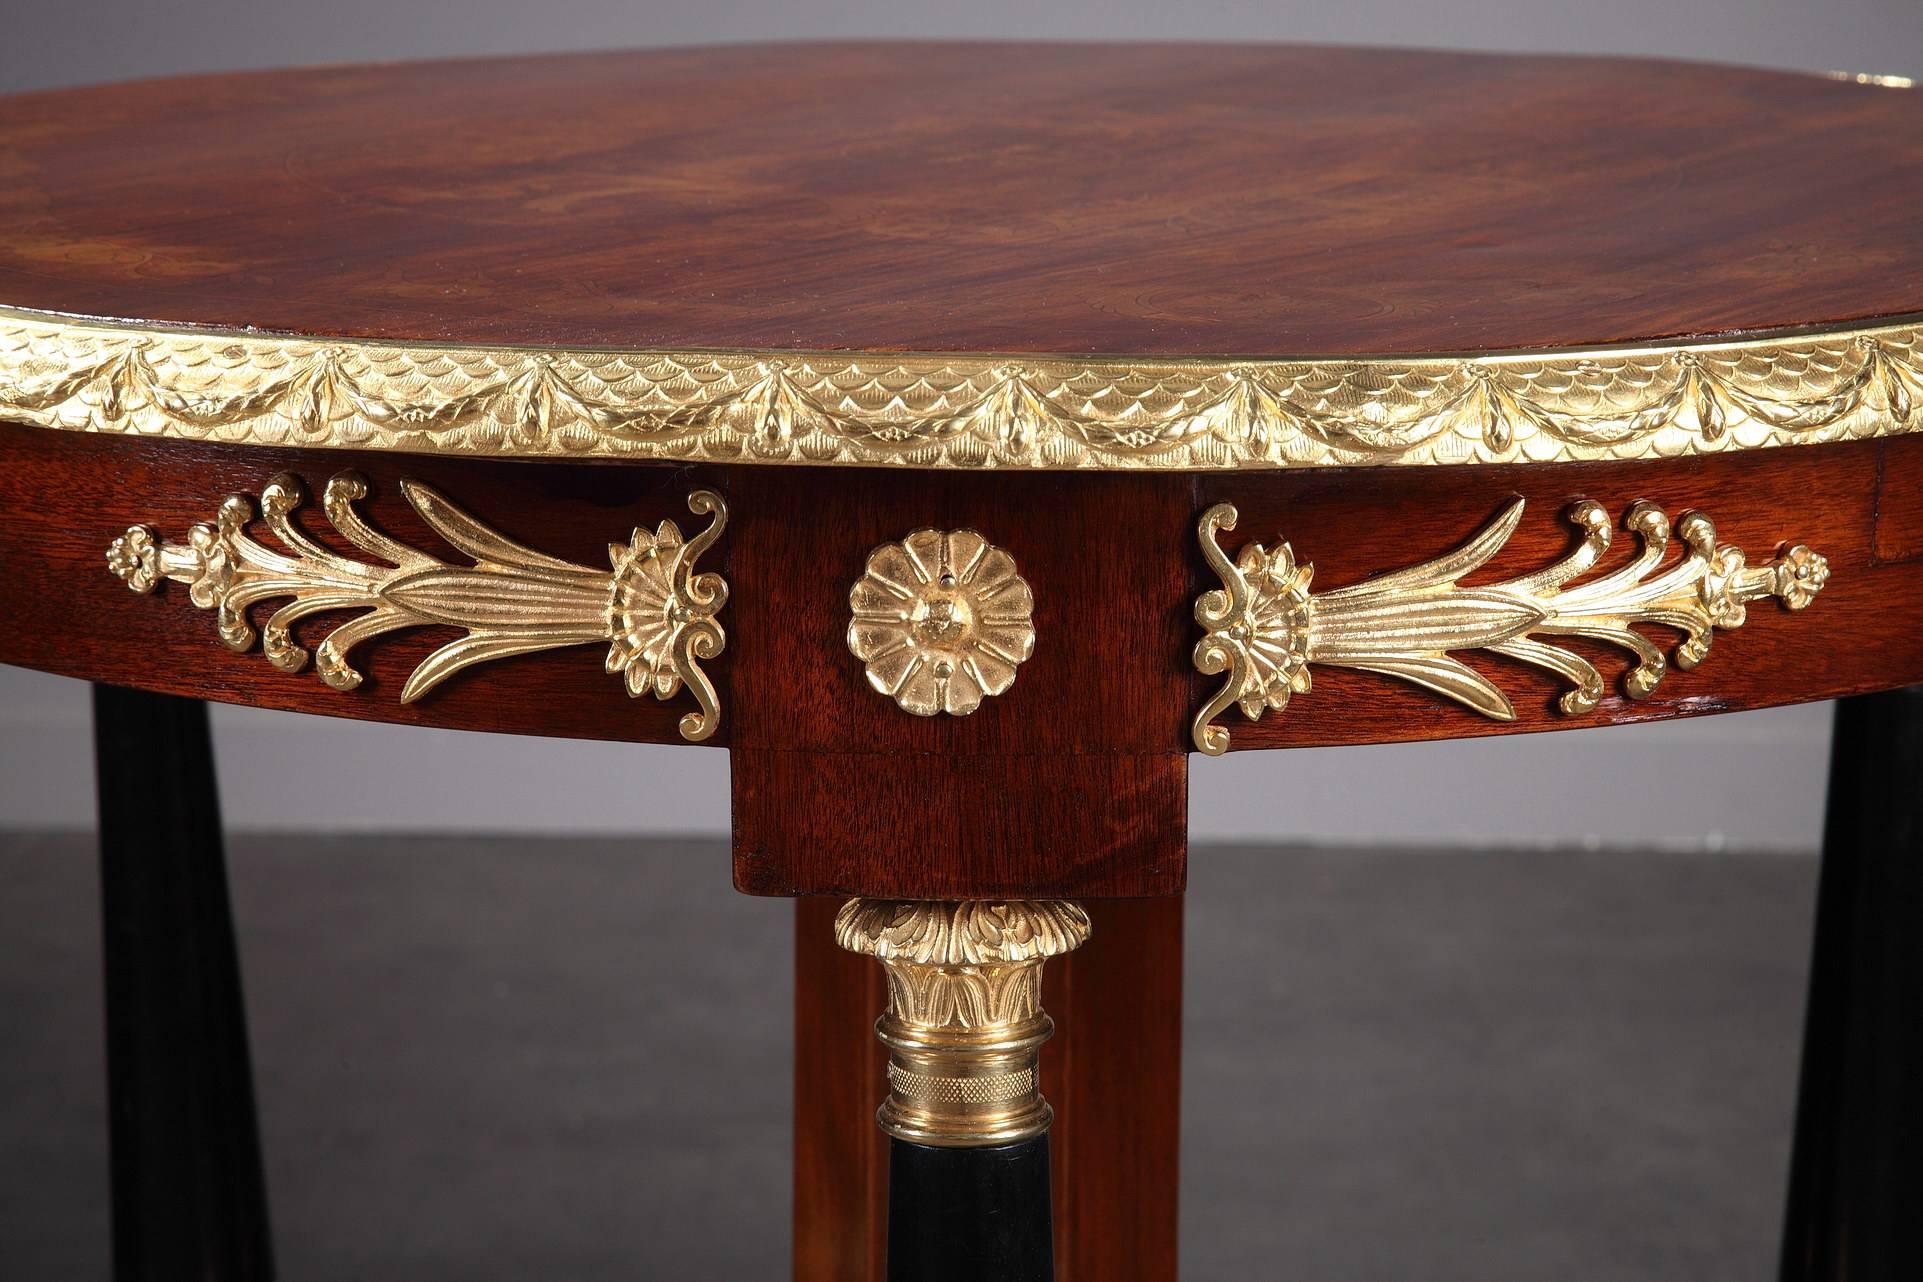 Mahogany and gilt bronze gueridon table resting on a central foot above a tripod base, surmounted by three dark wood columns decorated with gilt bronze Corinthian capitals and sphinx. The tray in wood marquetry with floral decoration and ormolu